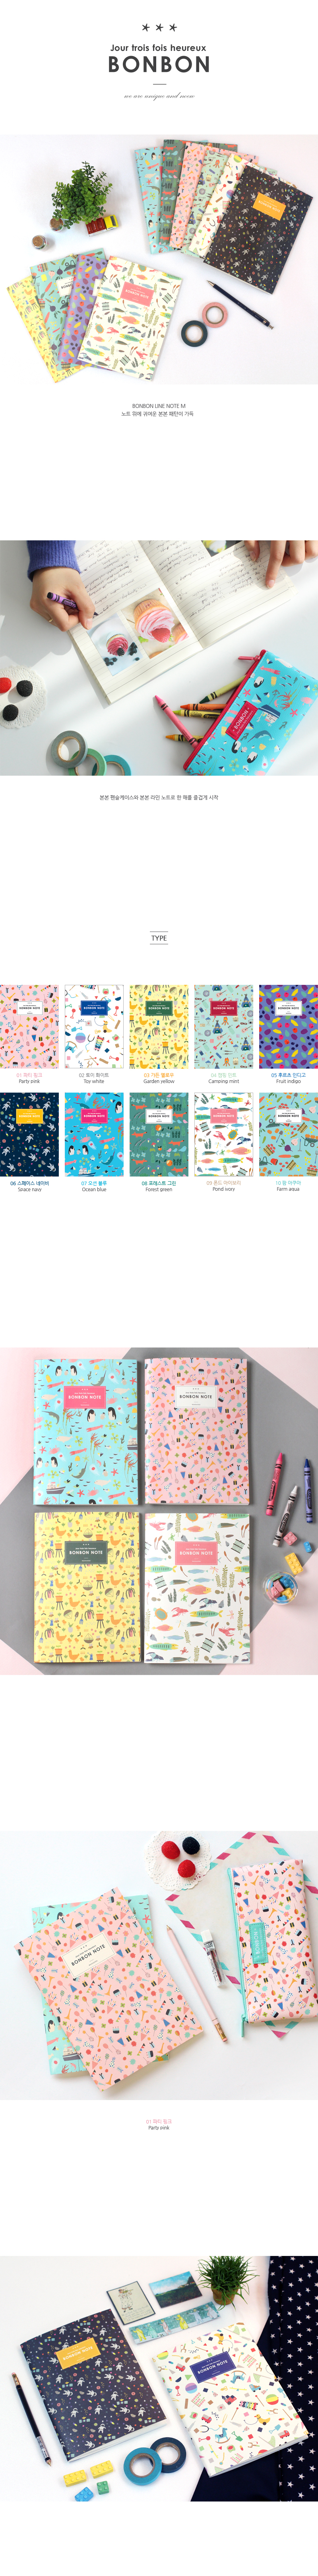 the magic notebook stationery shop uk [the magic notebook, stationery shop, the magic notebook uk]